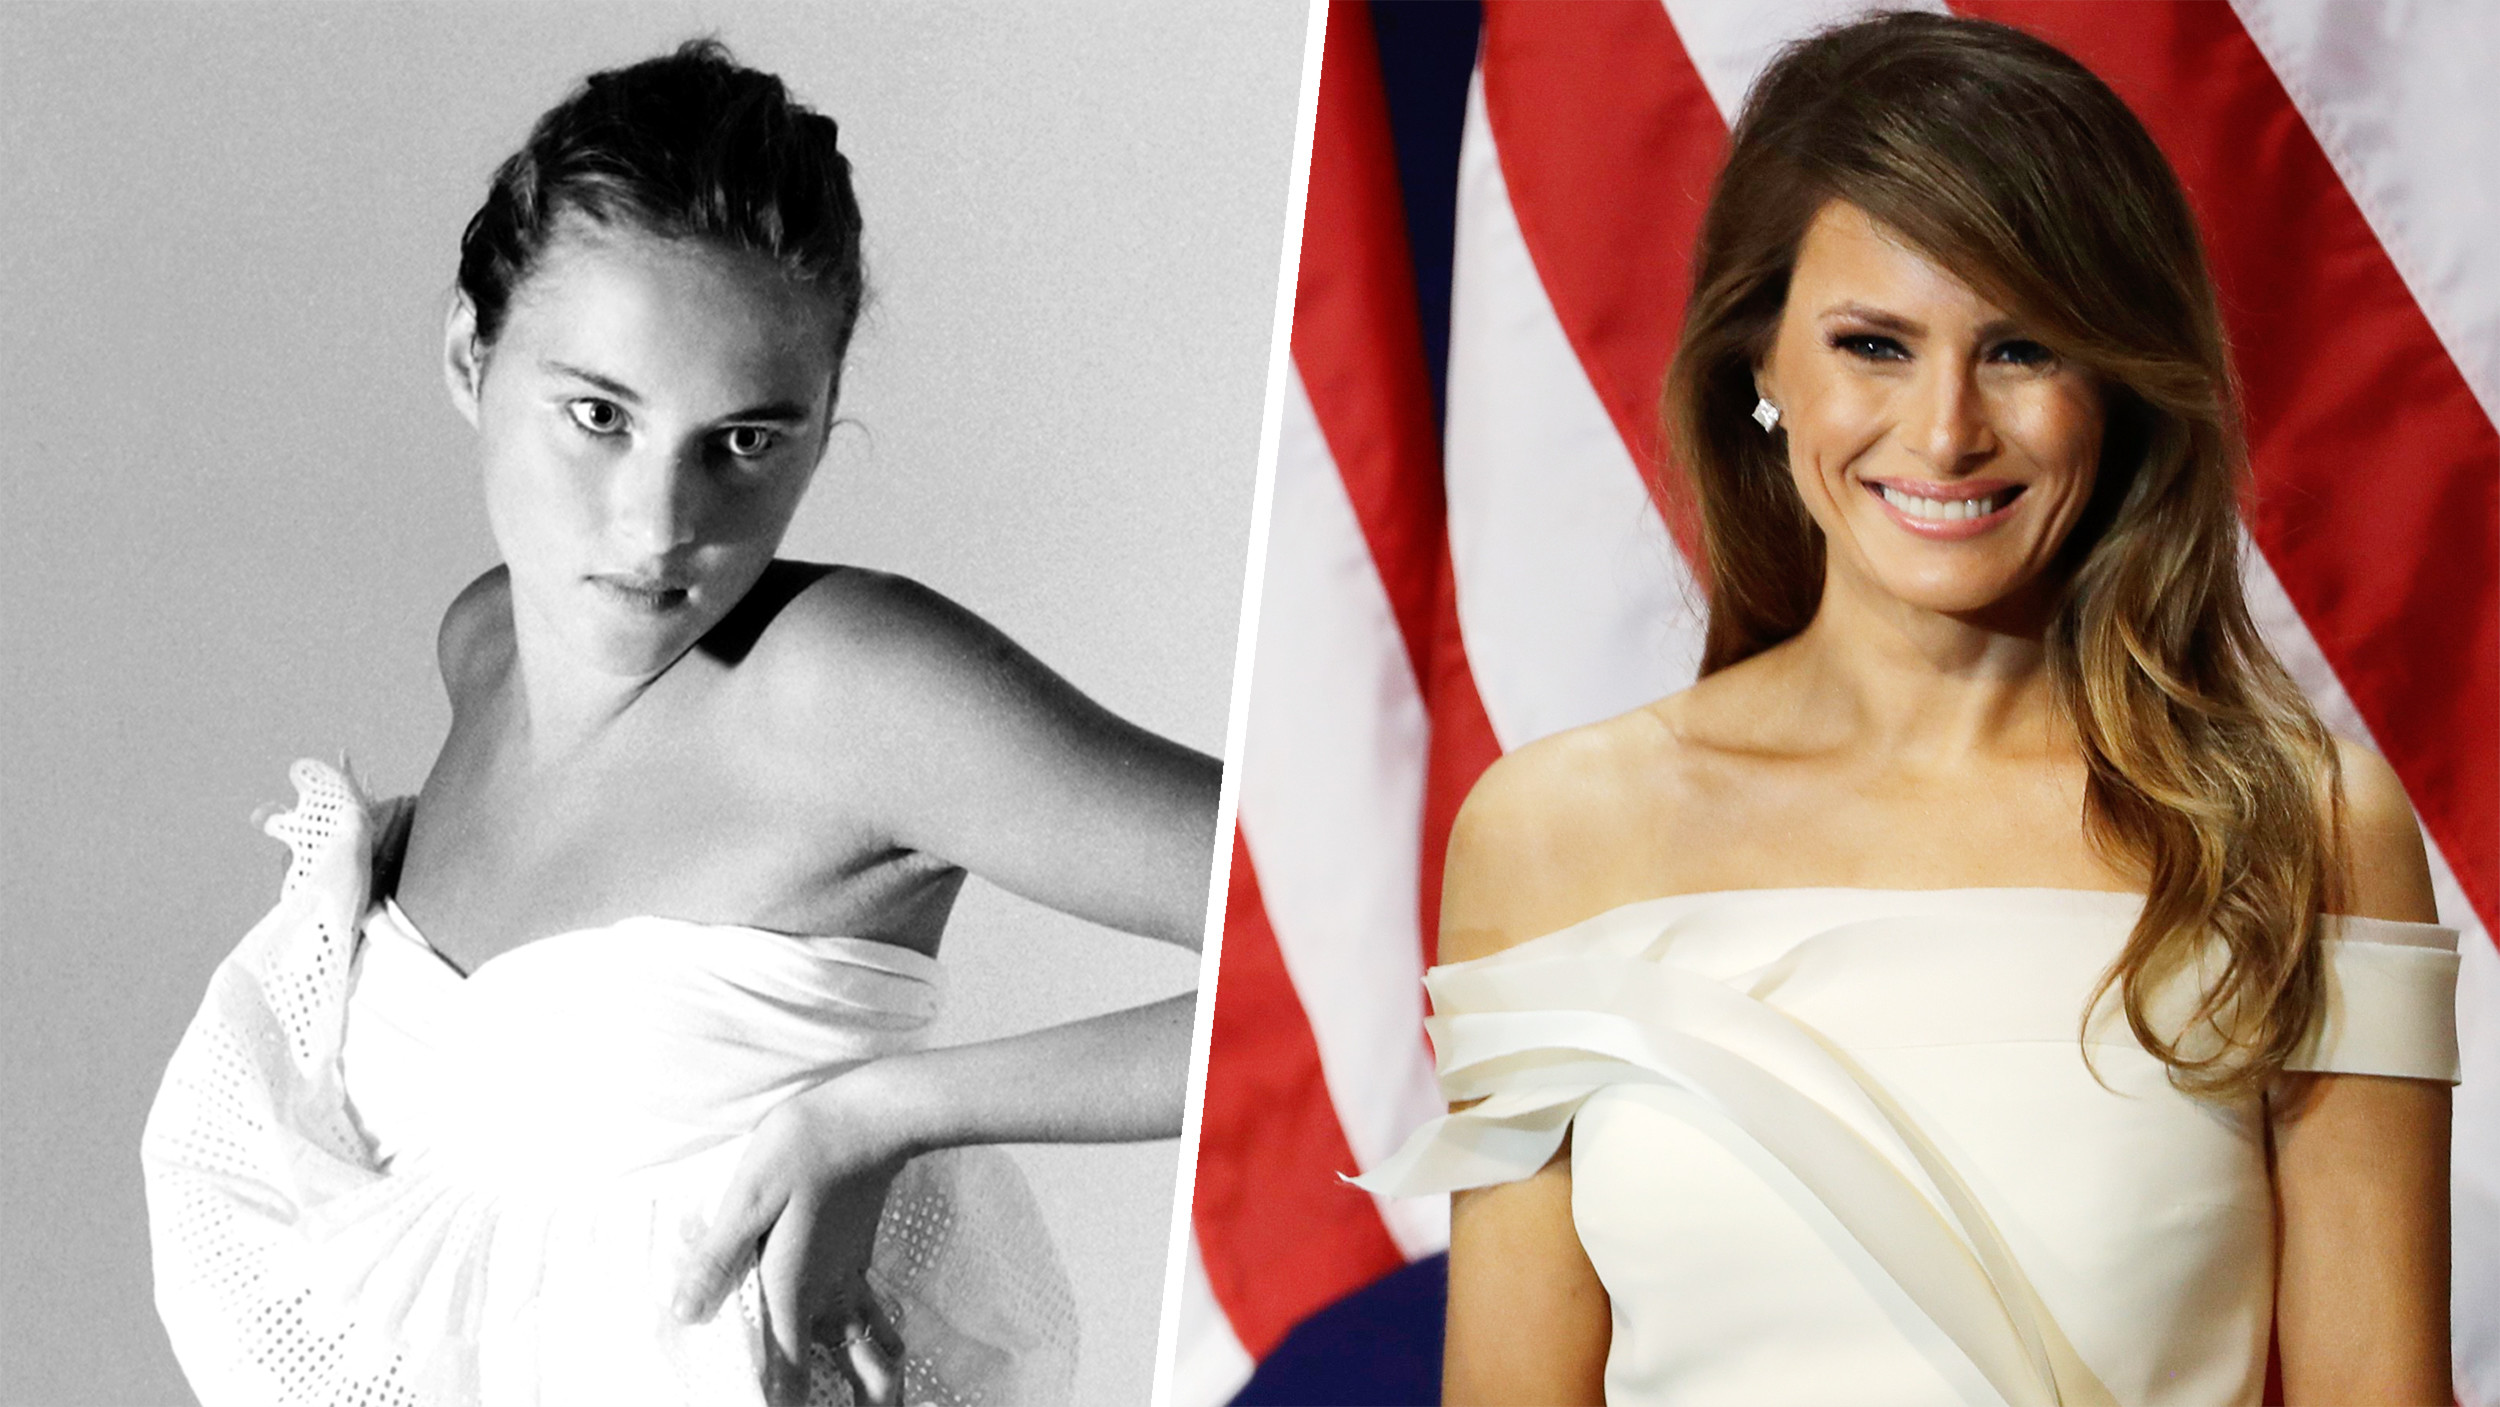 See photos of young Melania Trumps early career as a model at 16 – TODAY.com